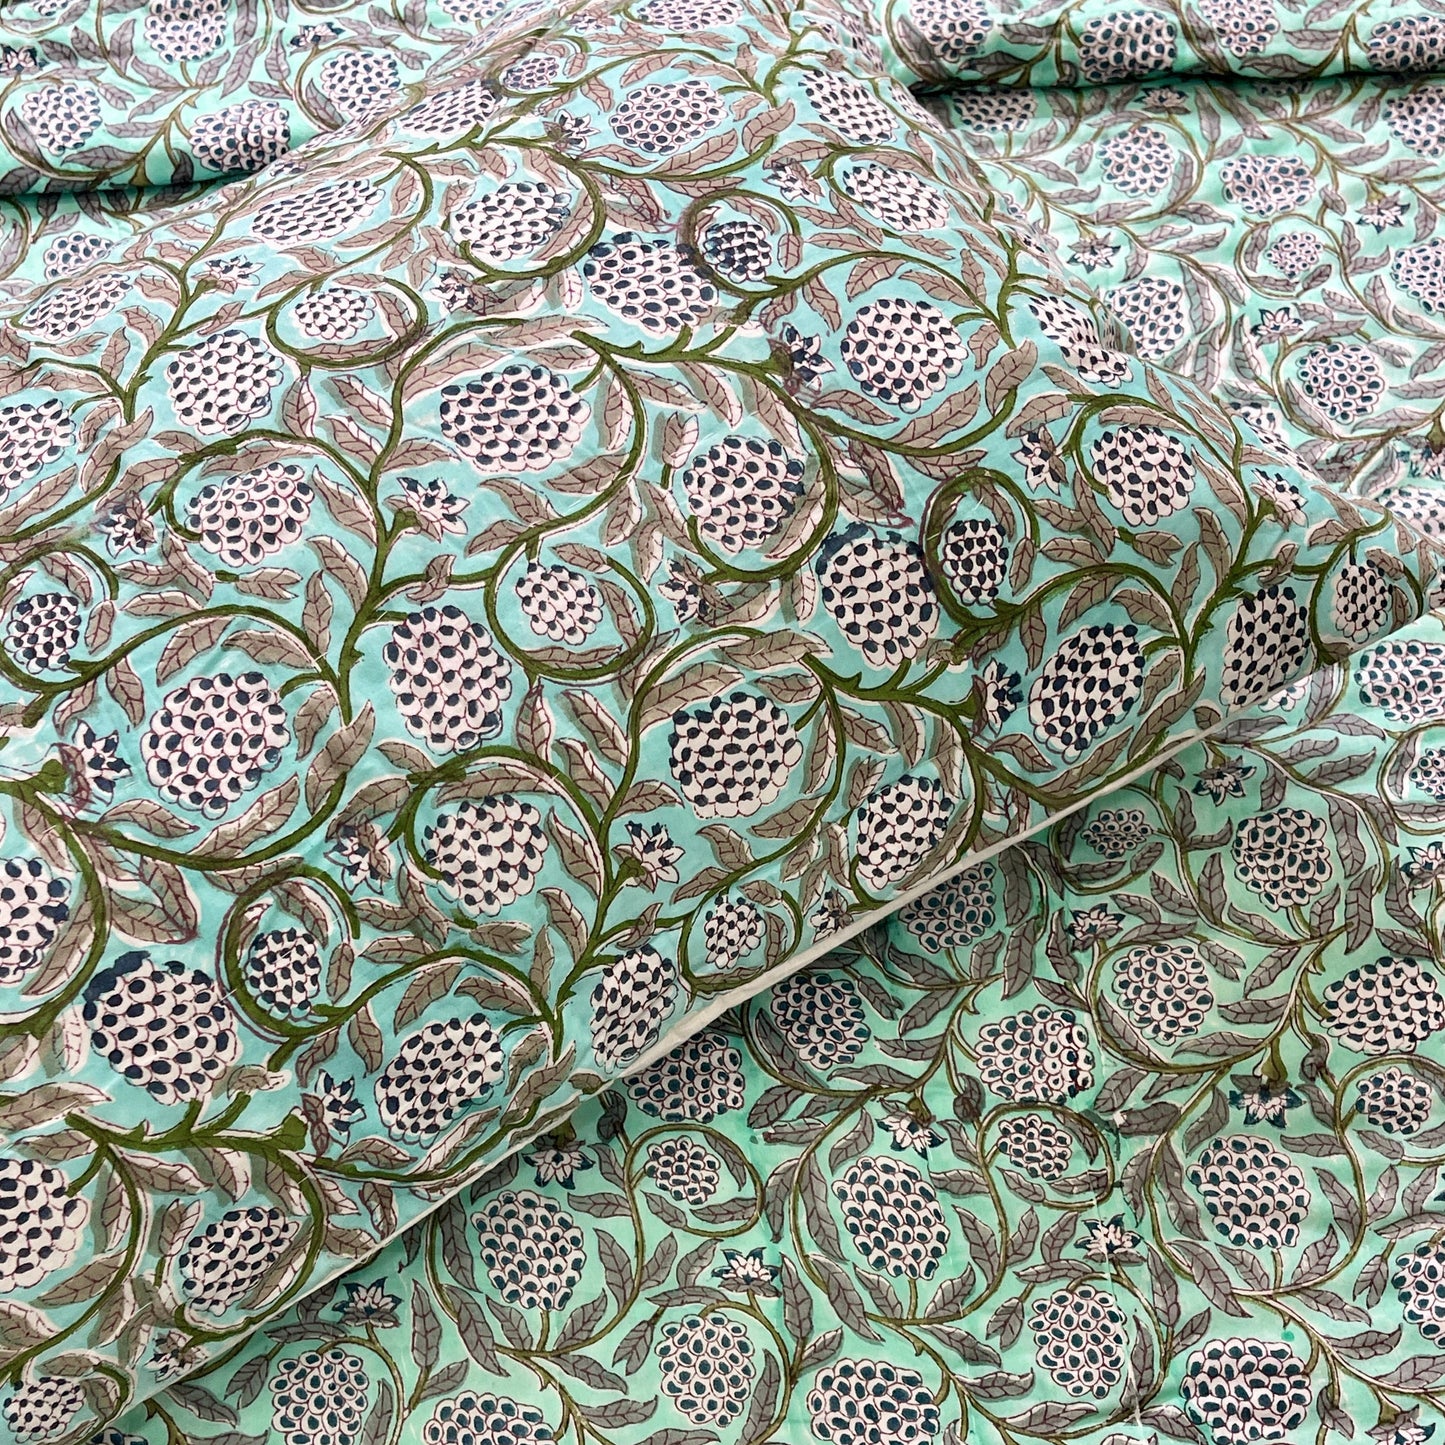 Hand Block Hand Printed Cotton Turquoise Floral Quilt Bedspread Set